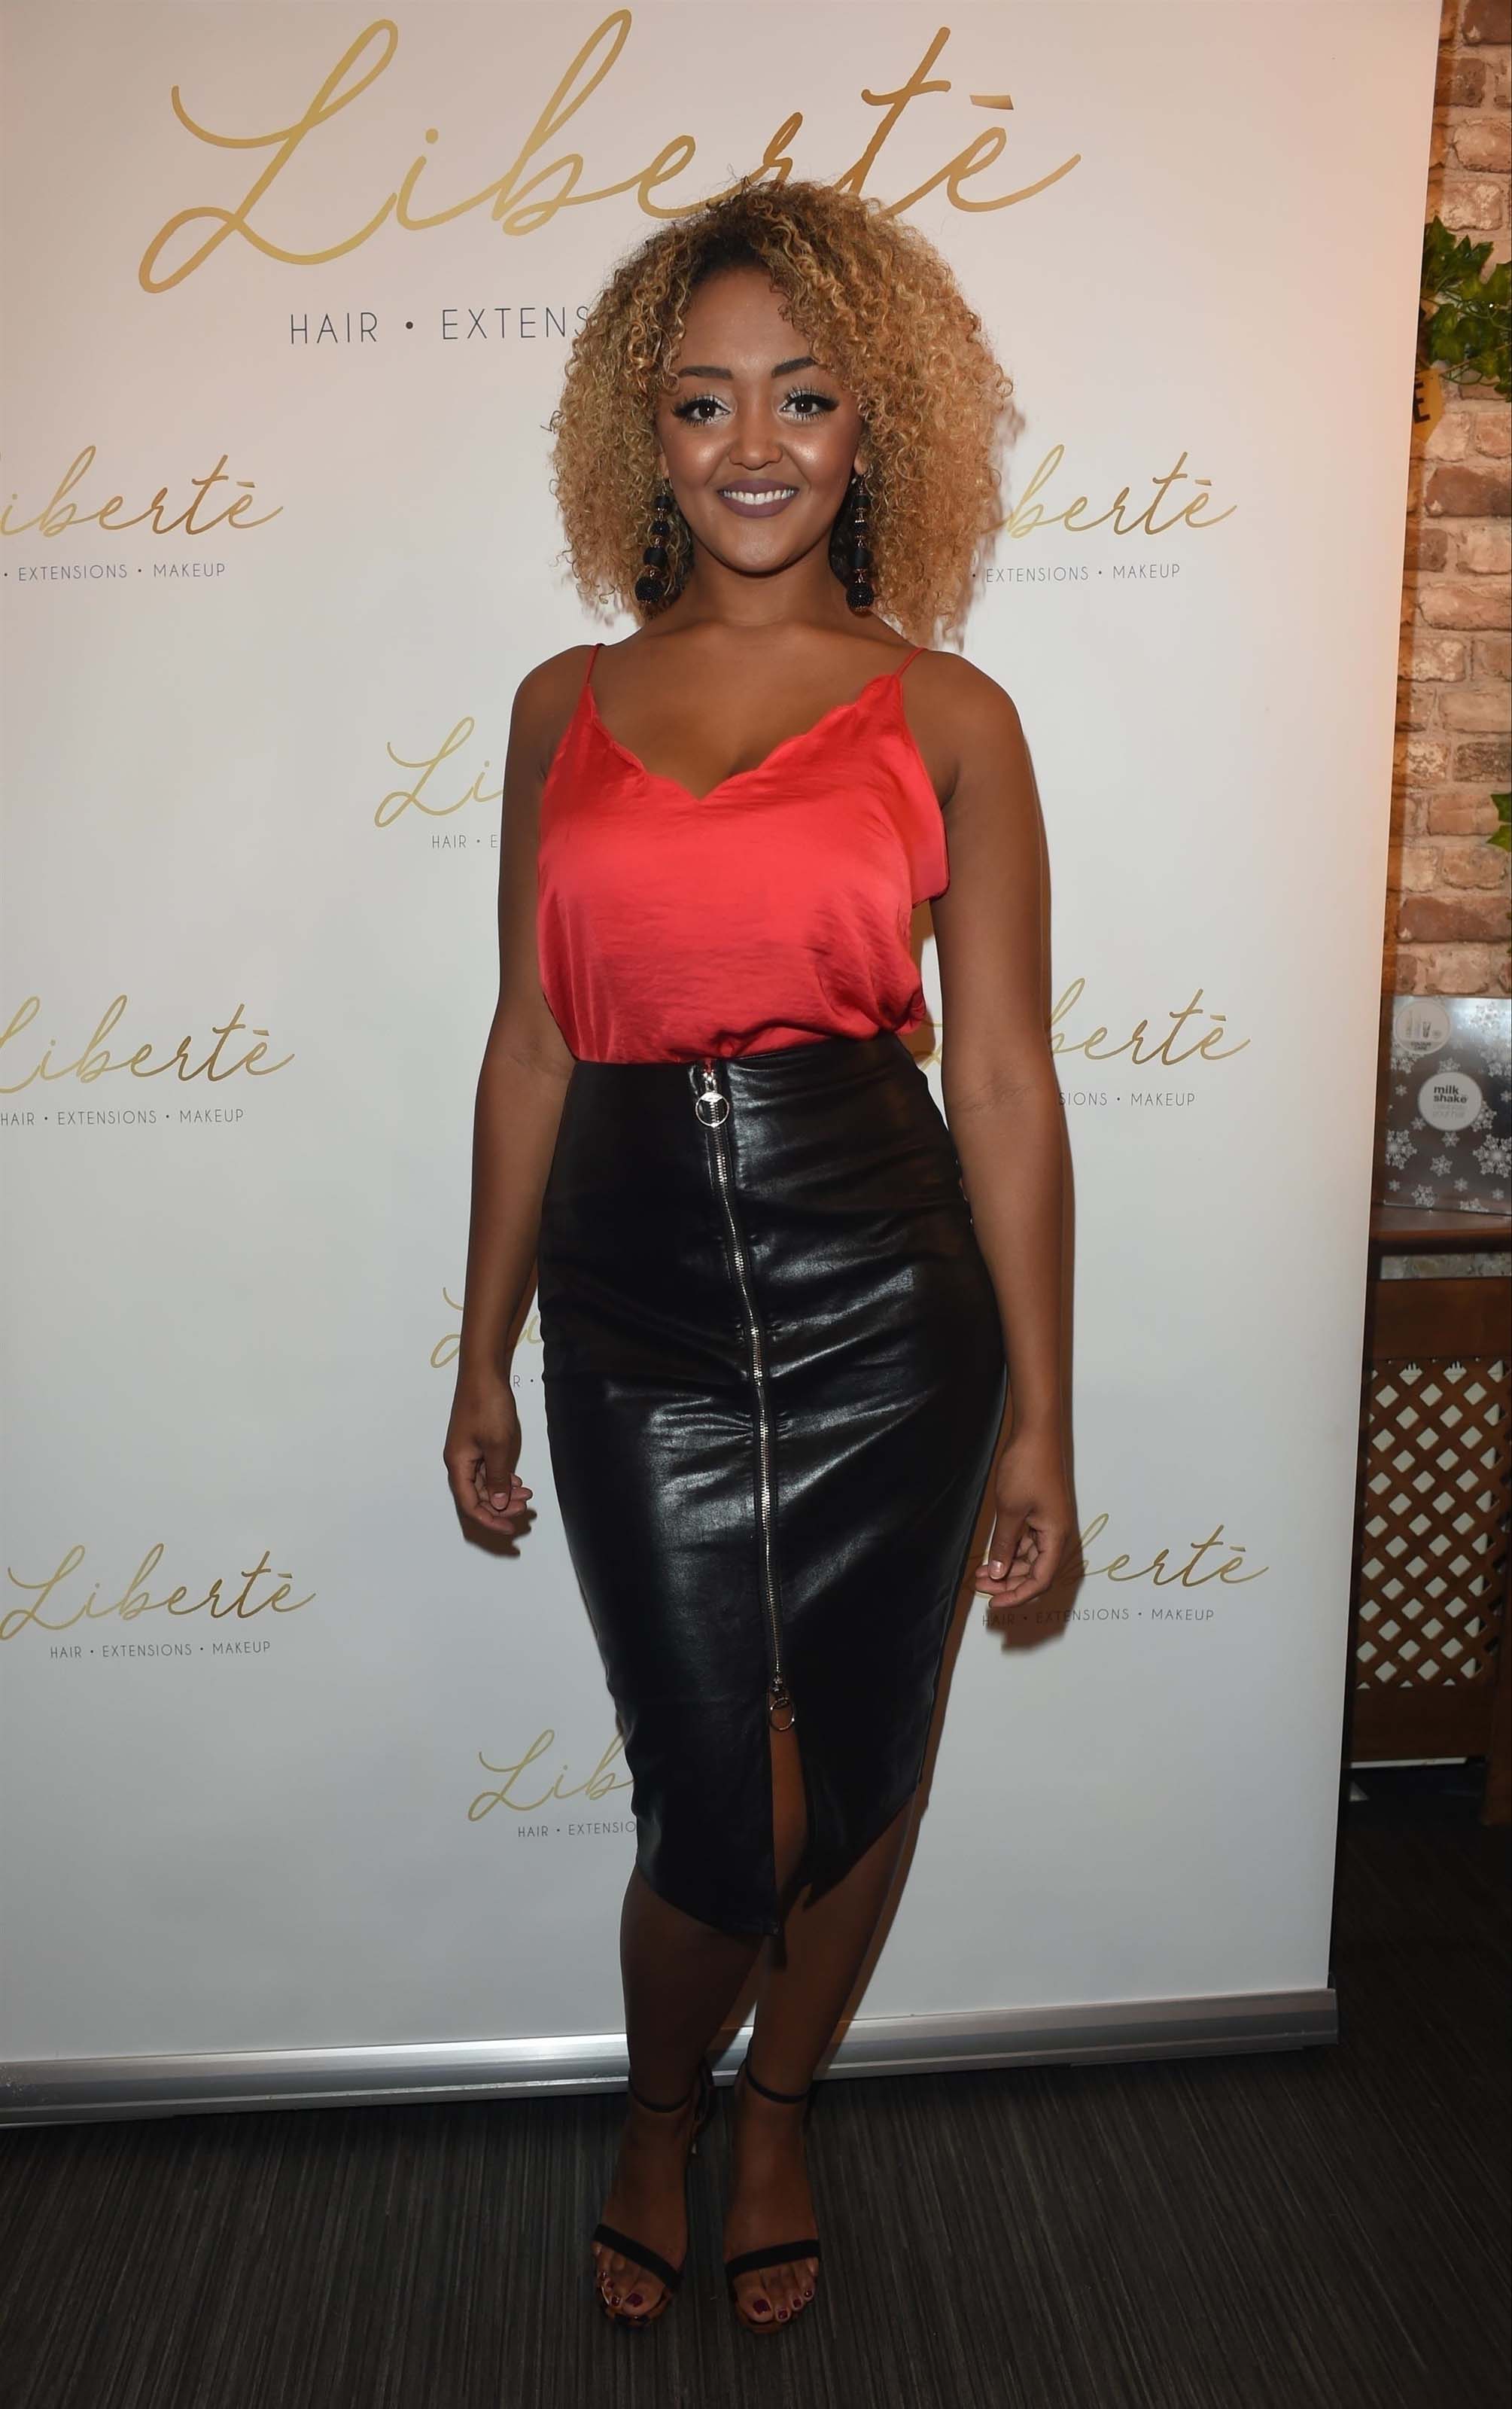 Alexandra Mardell attends the opening of a Hair and Beauty Salon